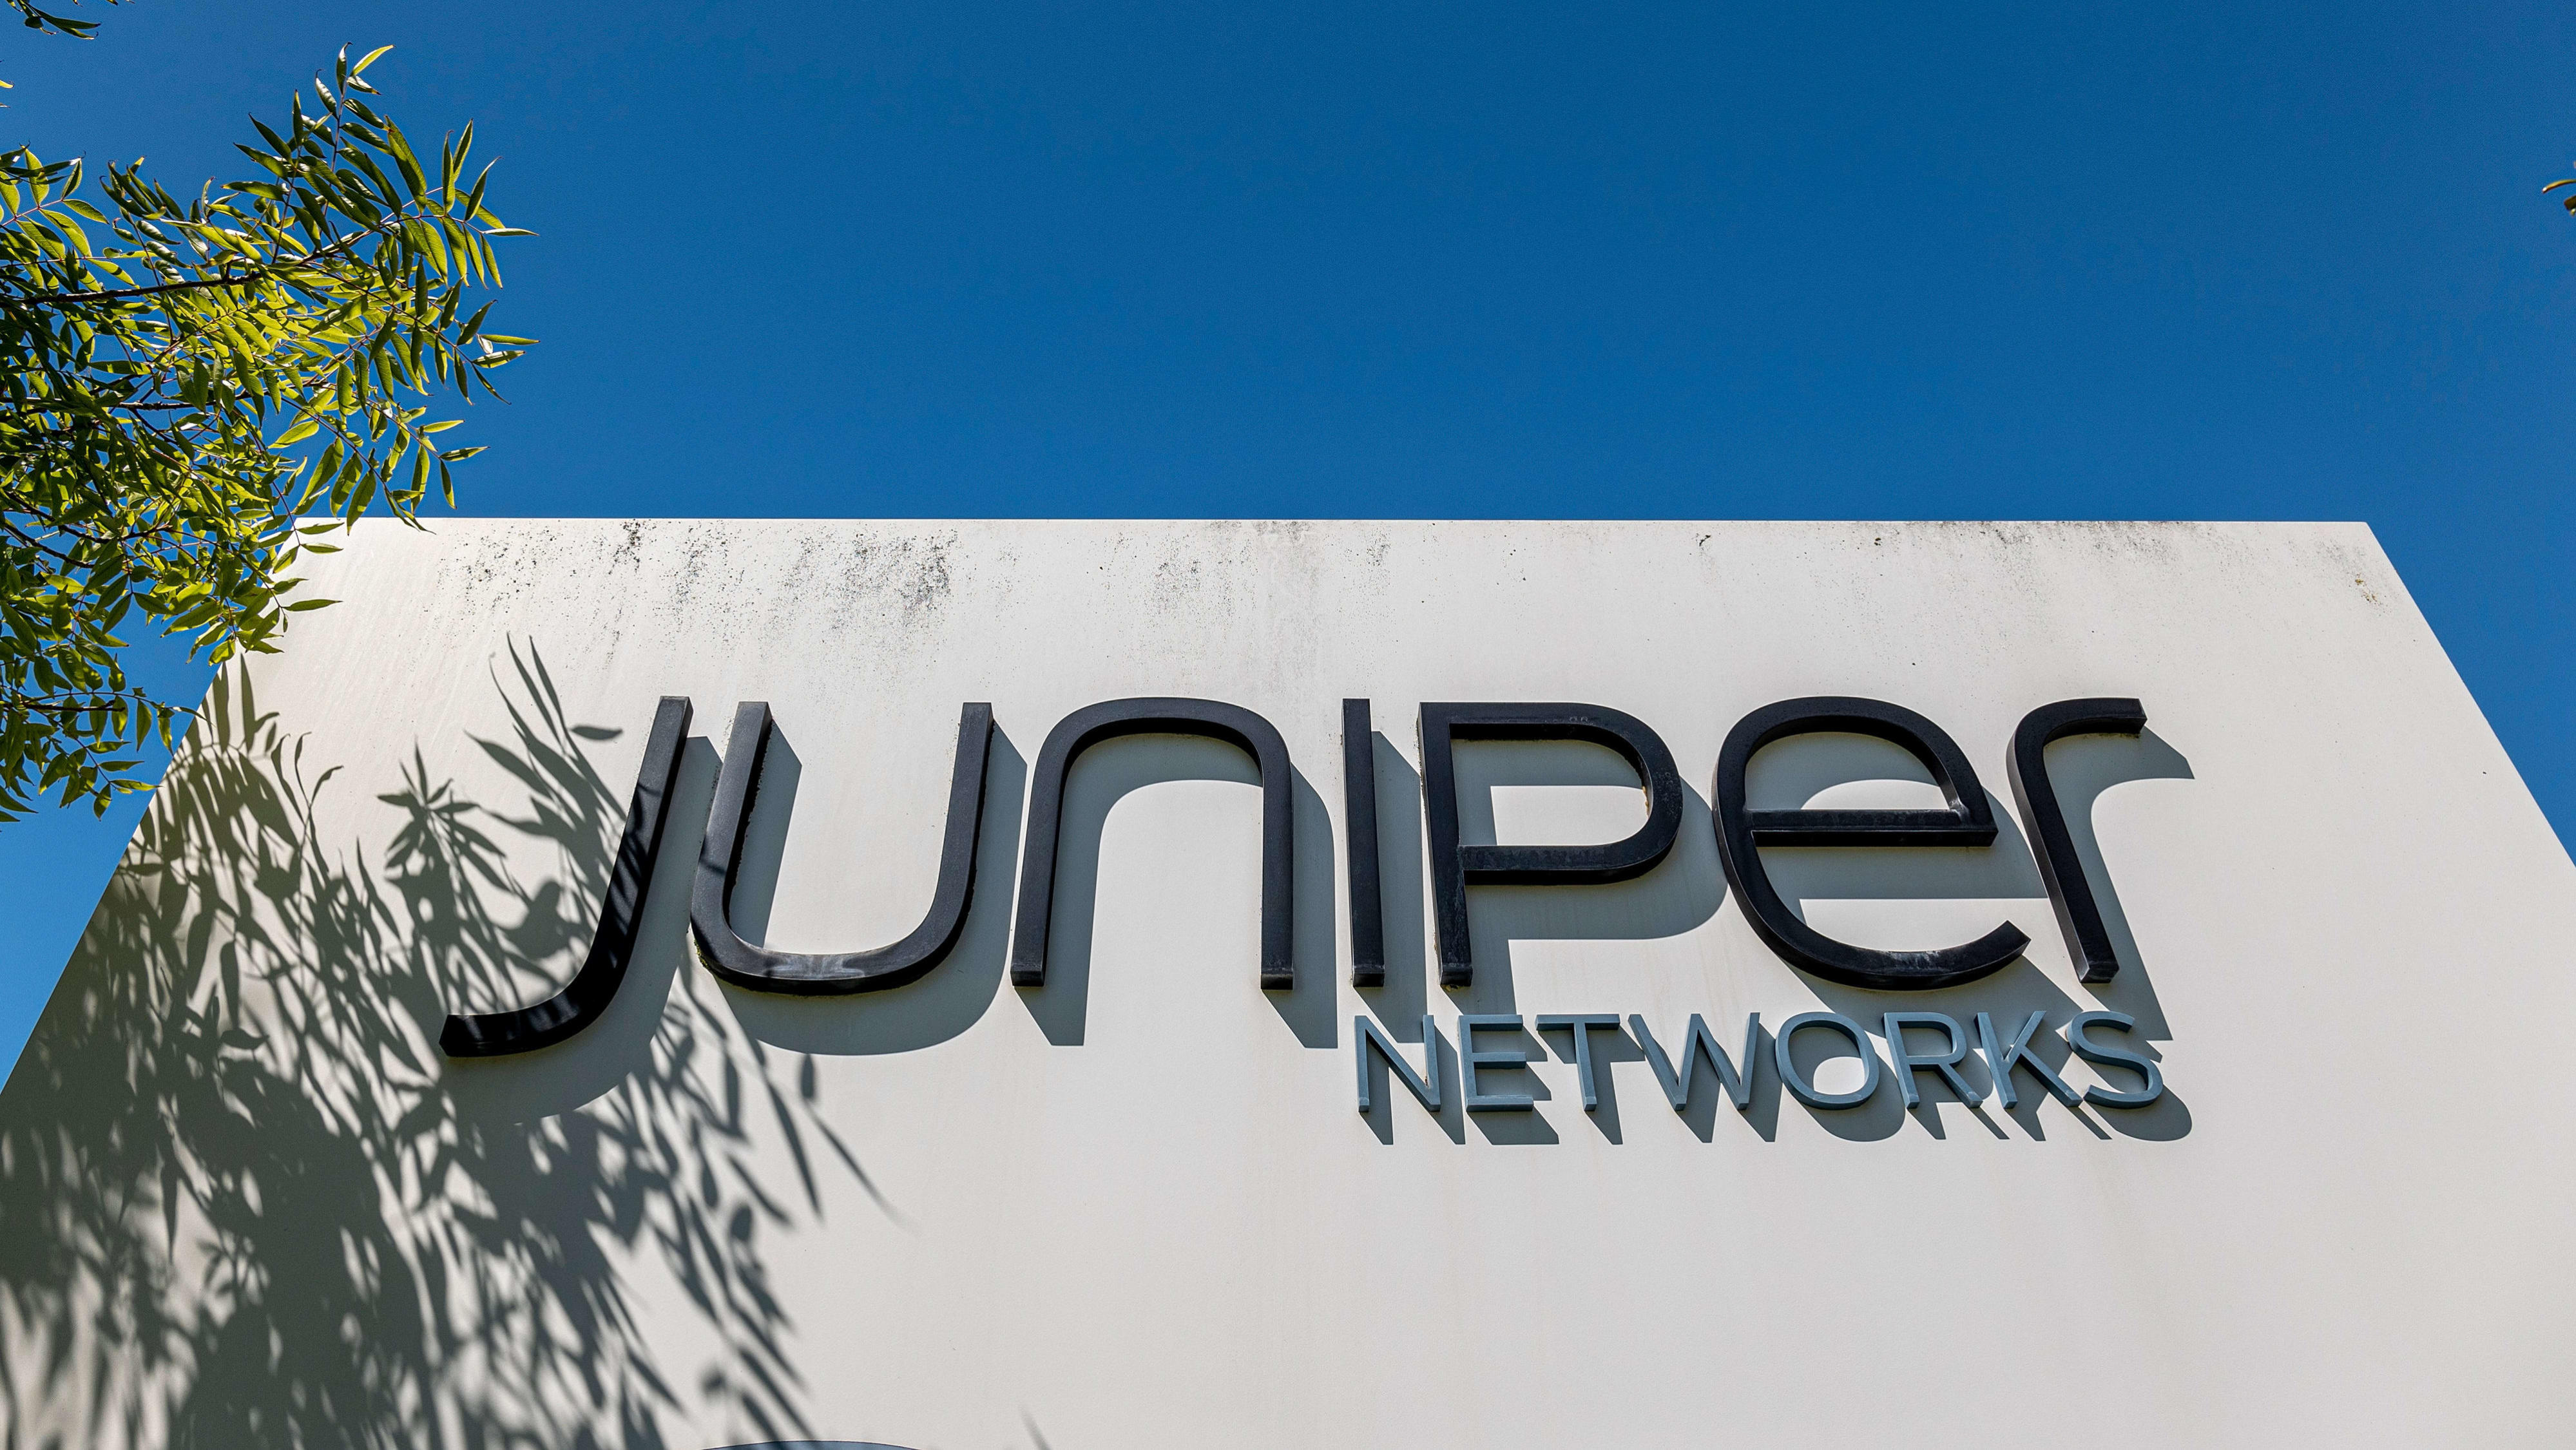 Growth driven by AI innovation in market: Juniper Networks CEO